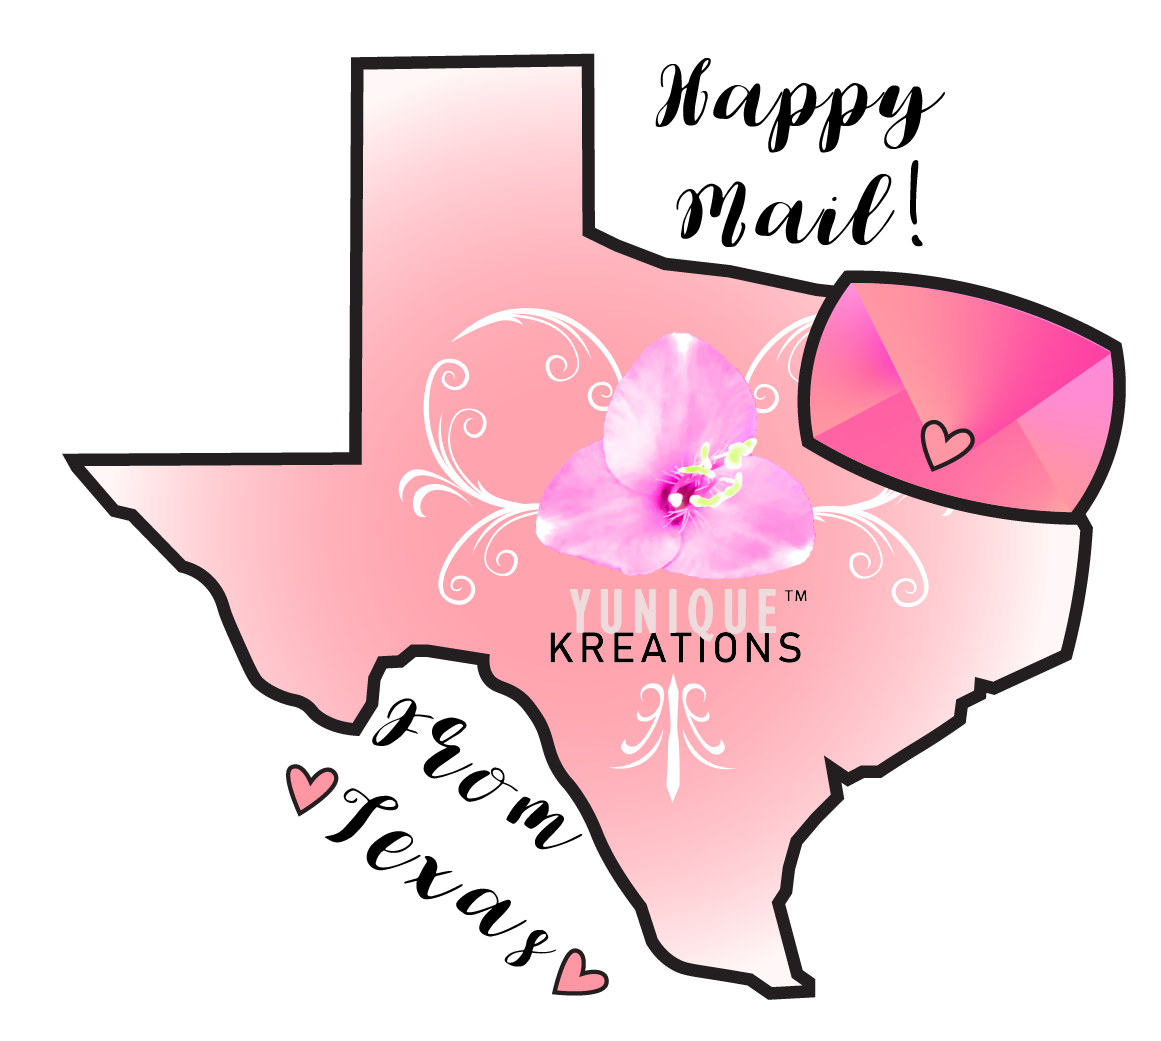 yunique kreations - from texas 2.png